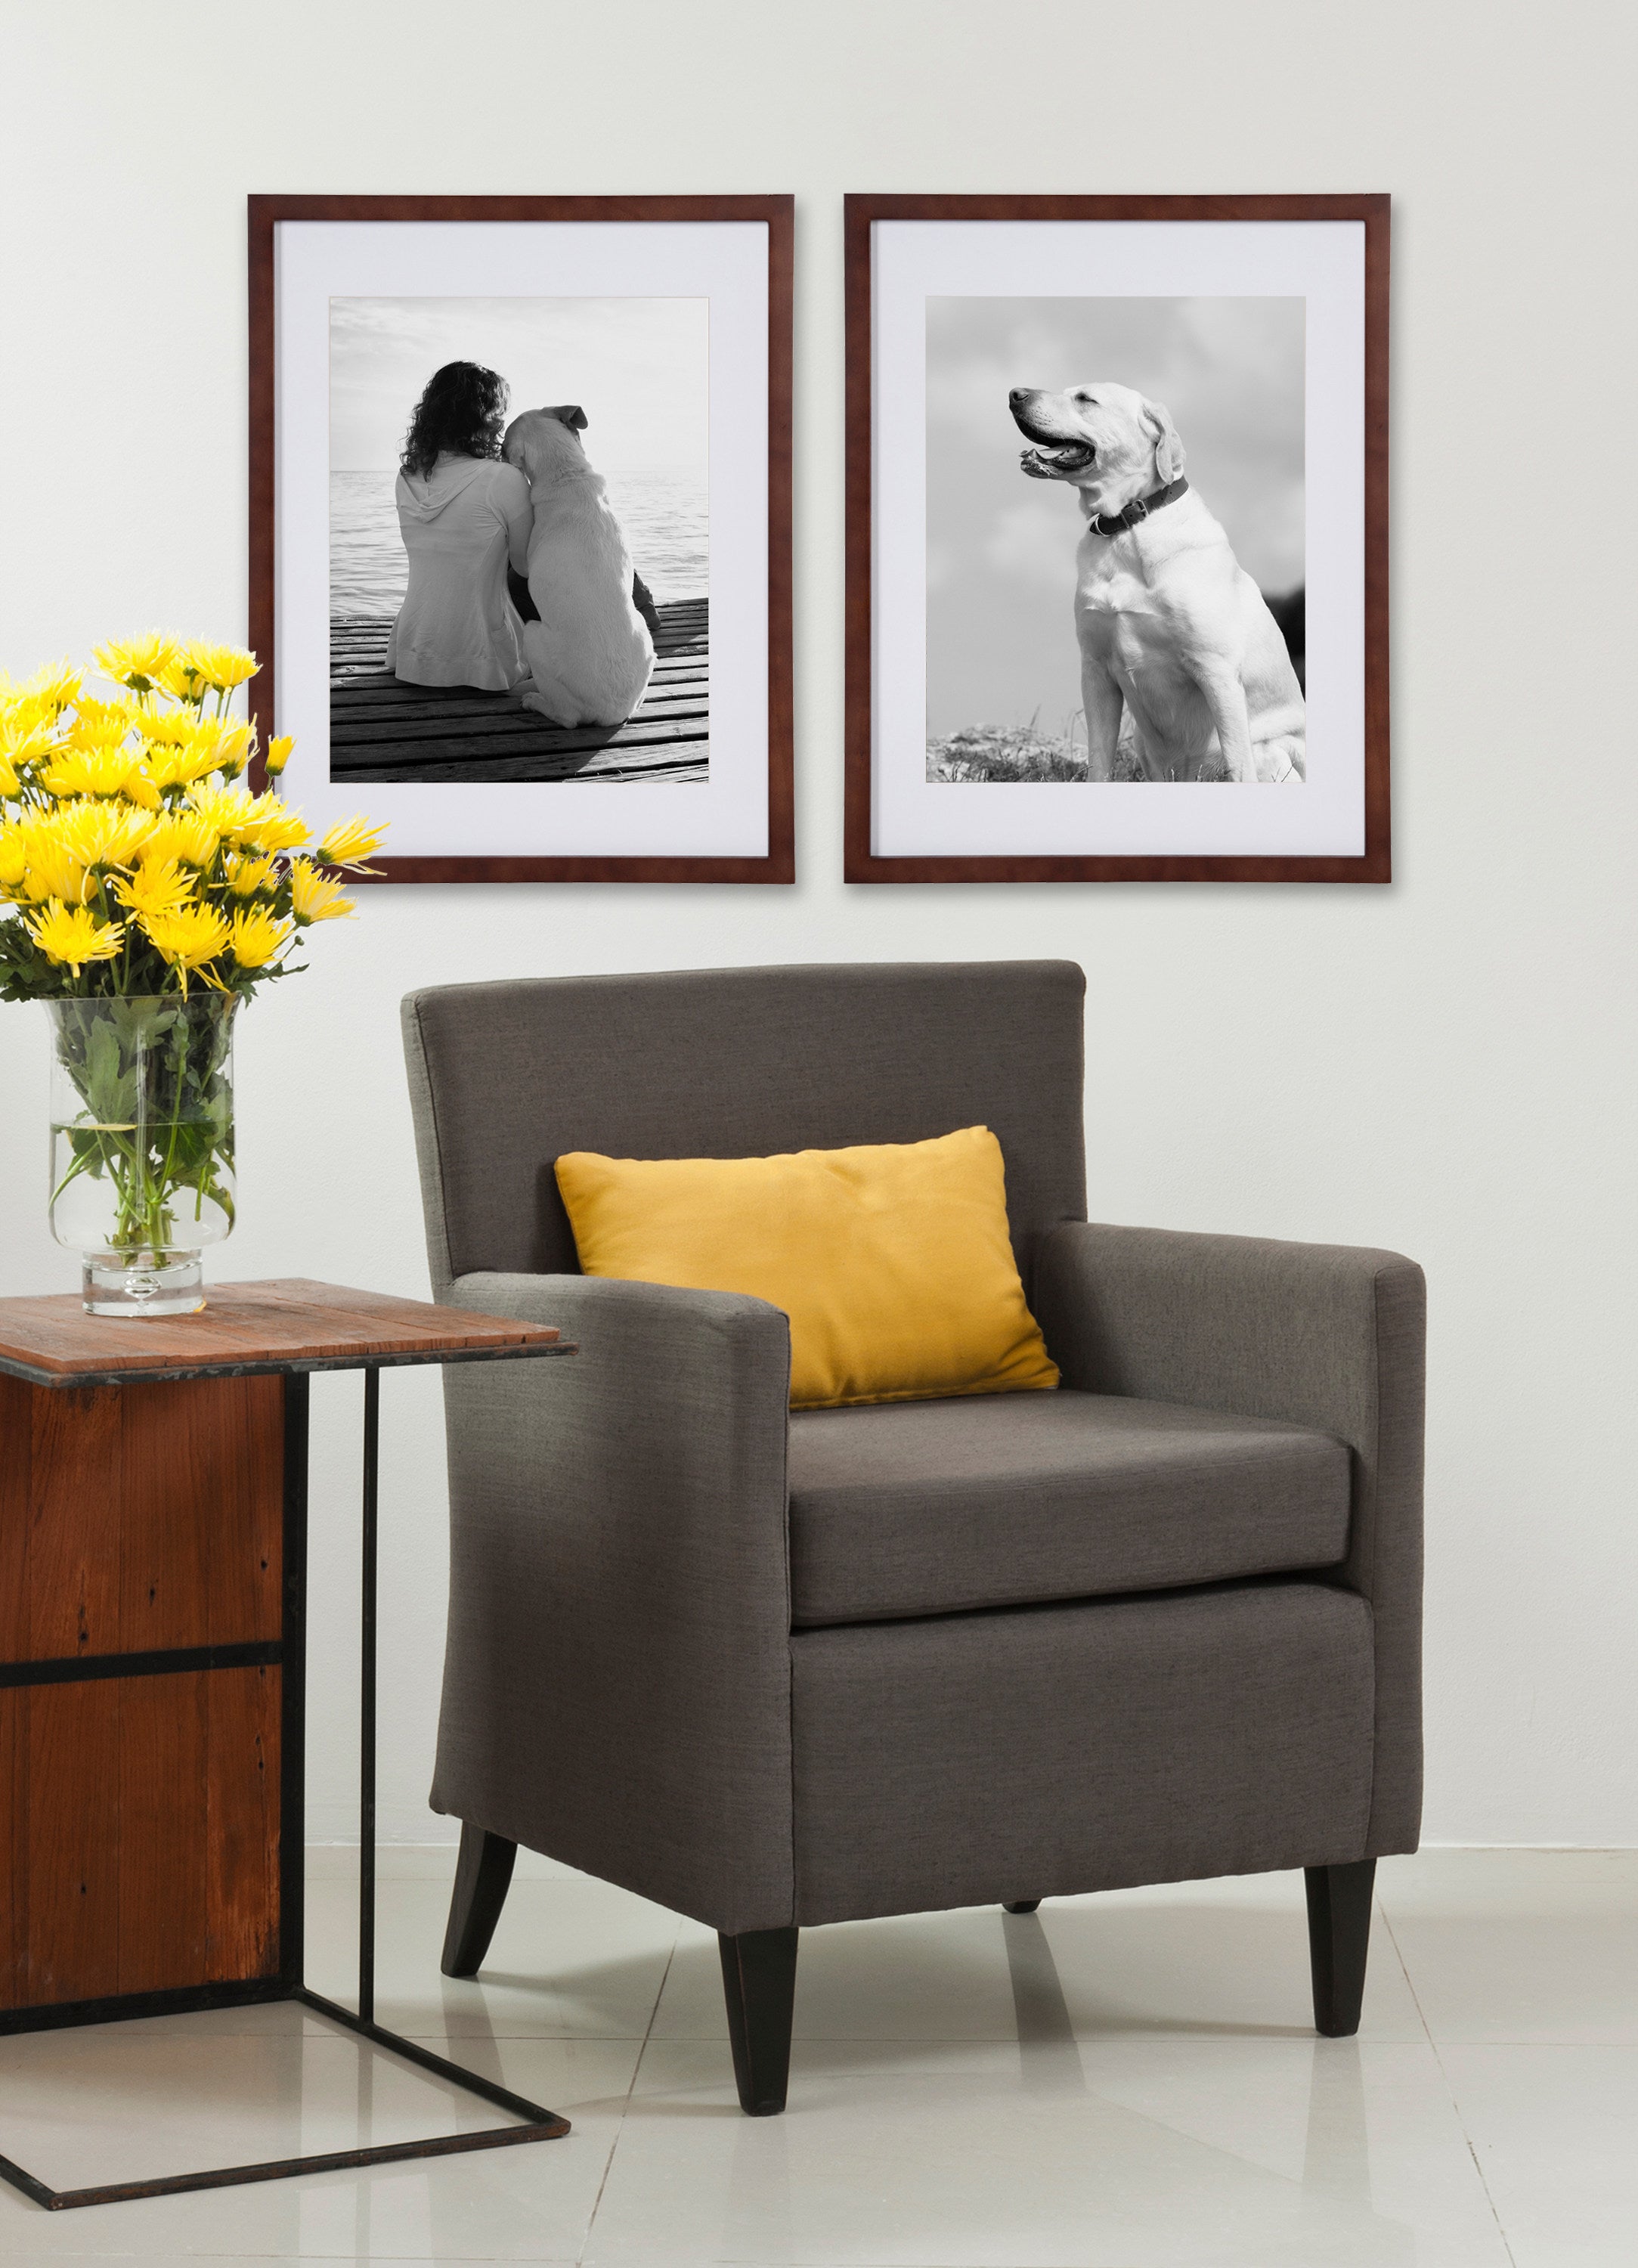 Gallery 14x18 matted to 11x14 Wood Picture Frame, Set of 2